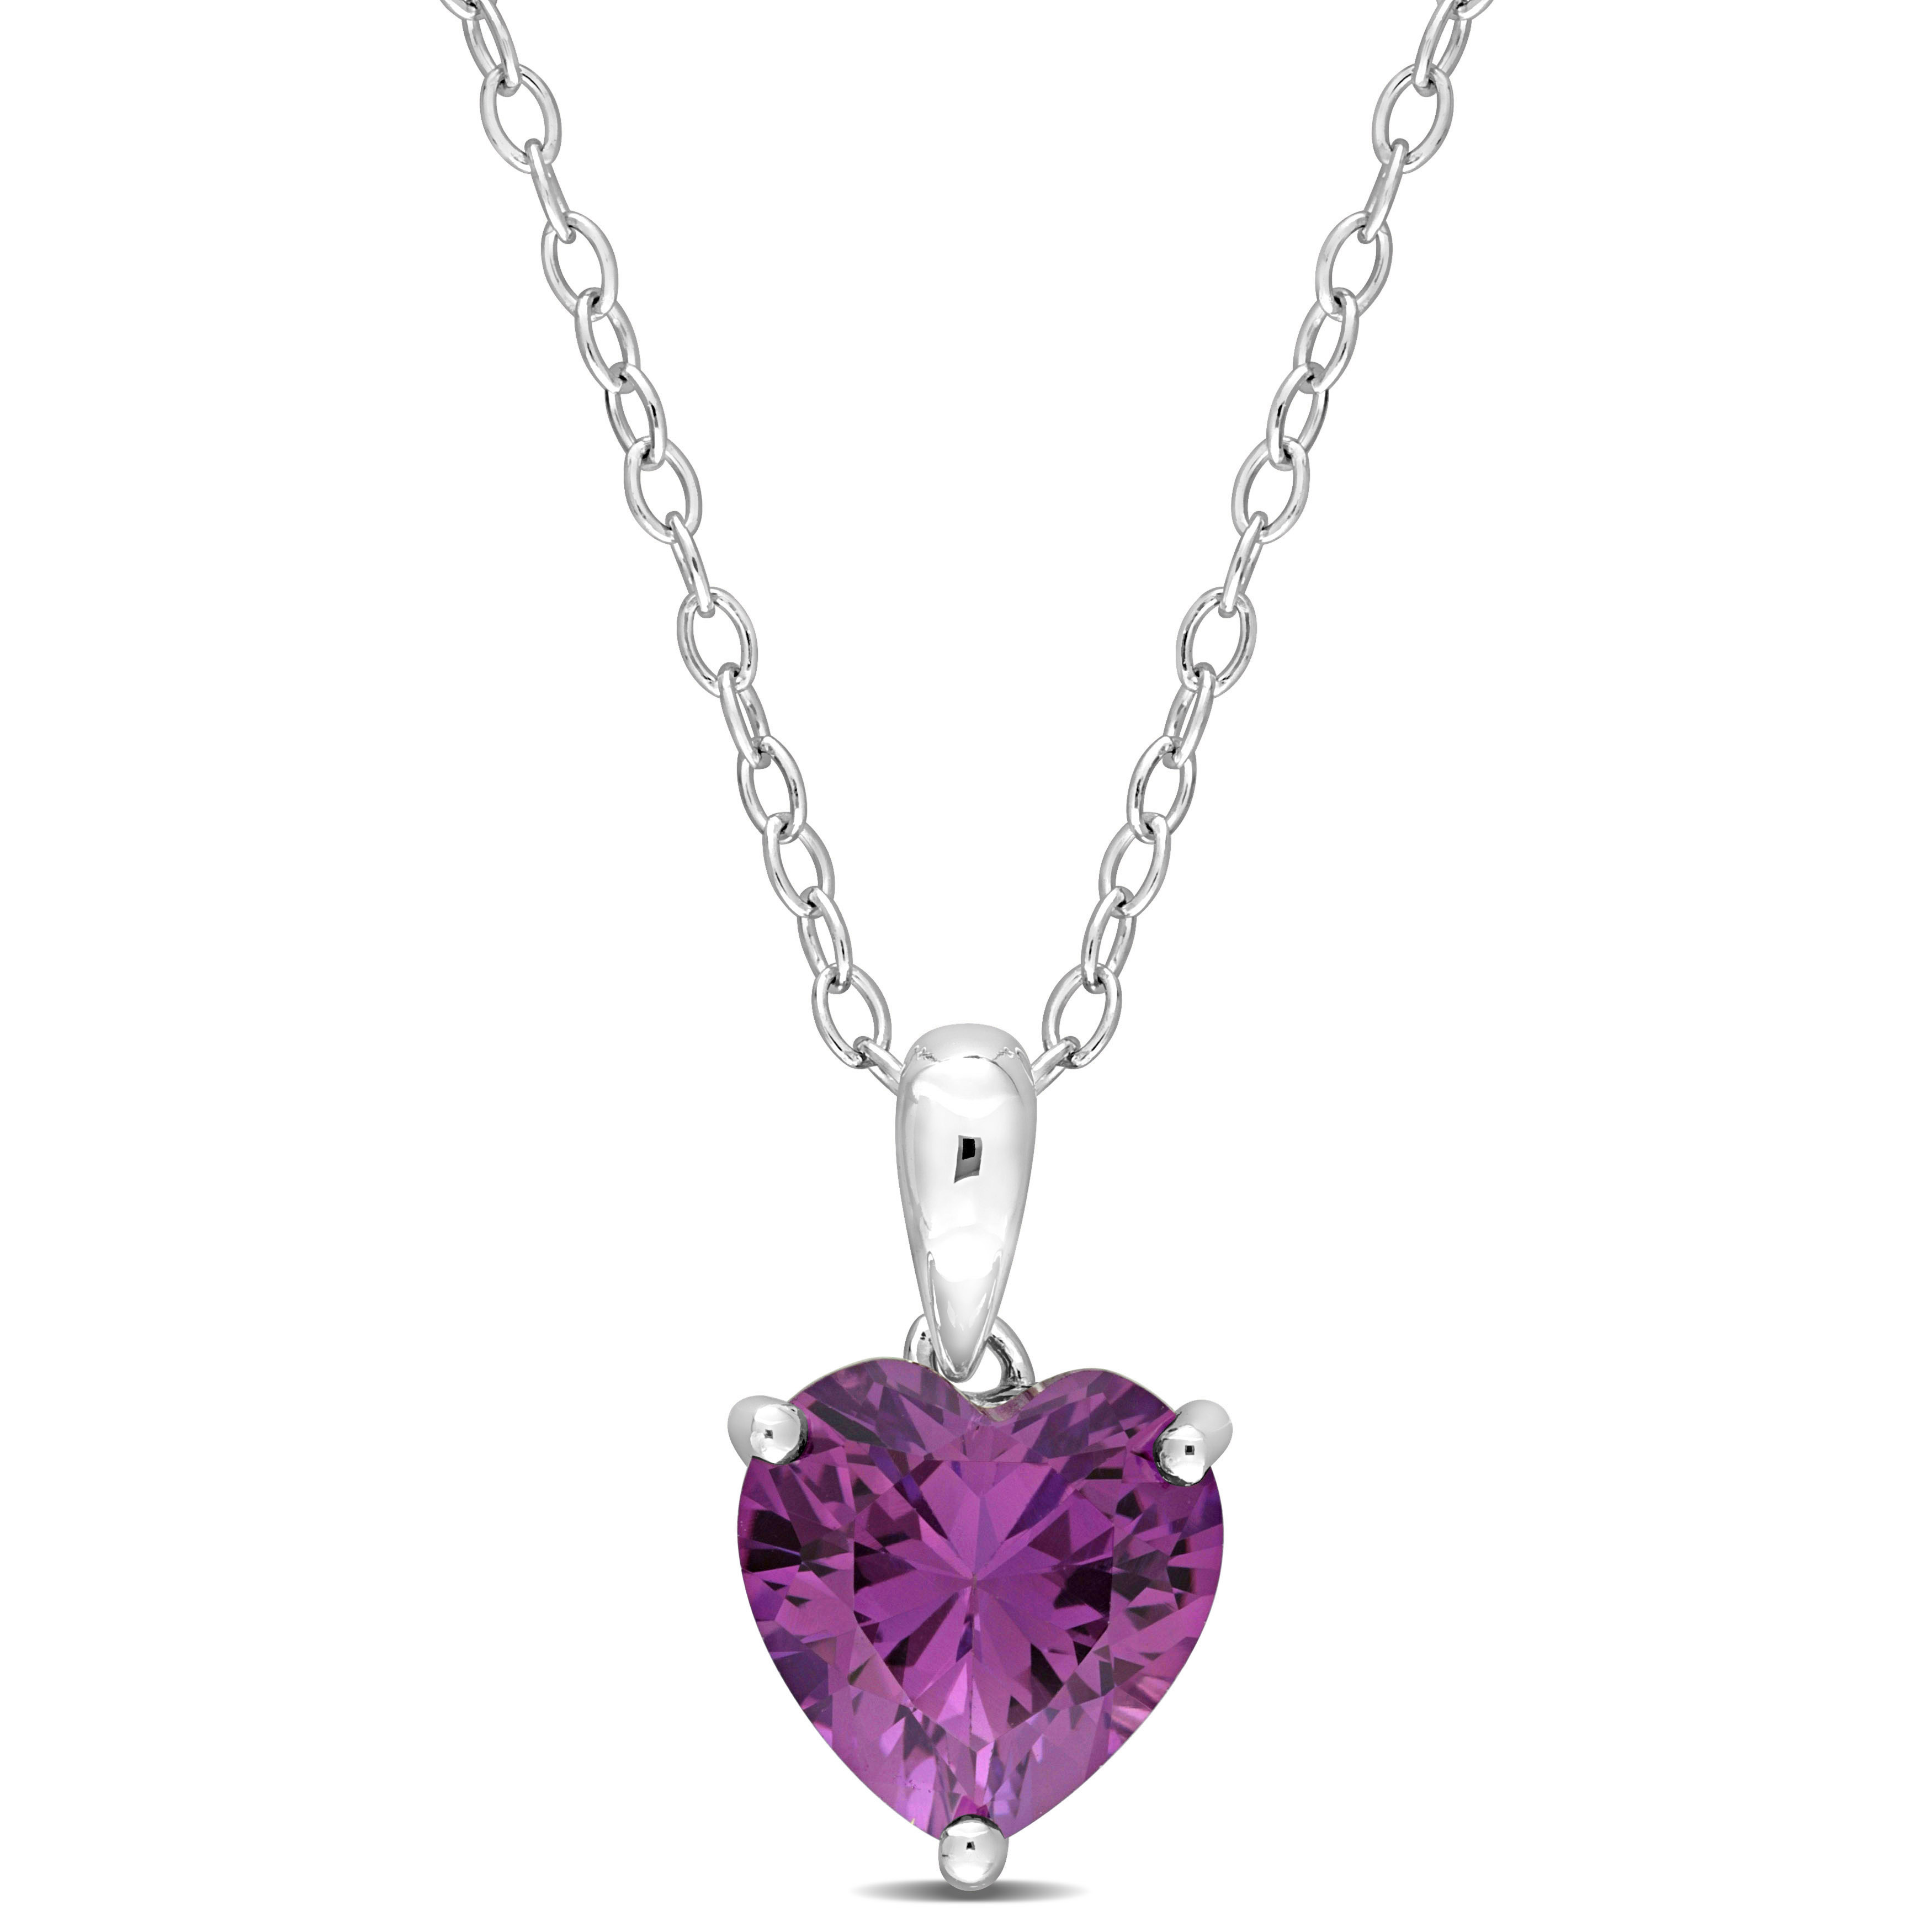 2 1/4 CT TGW Heart Shape Simulated Alexandrite Solitaire Heart Design Pendant with Chain in Sterling Silver - 18 in.